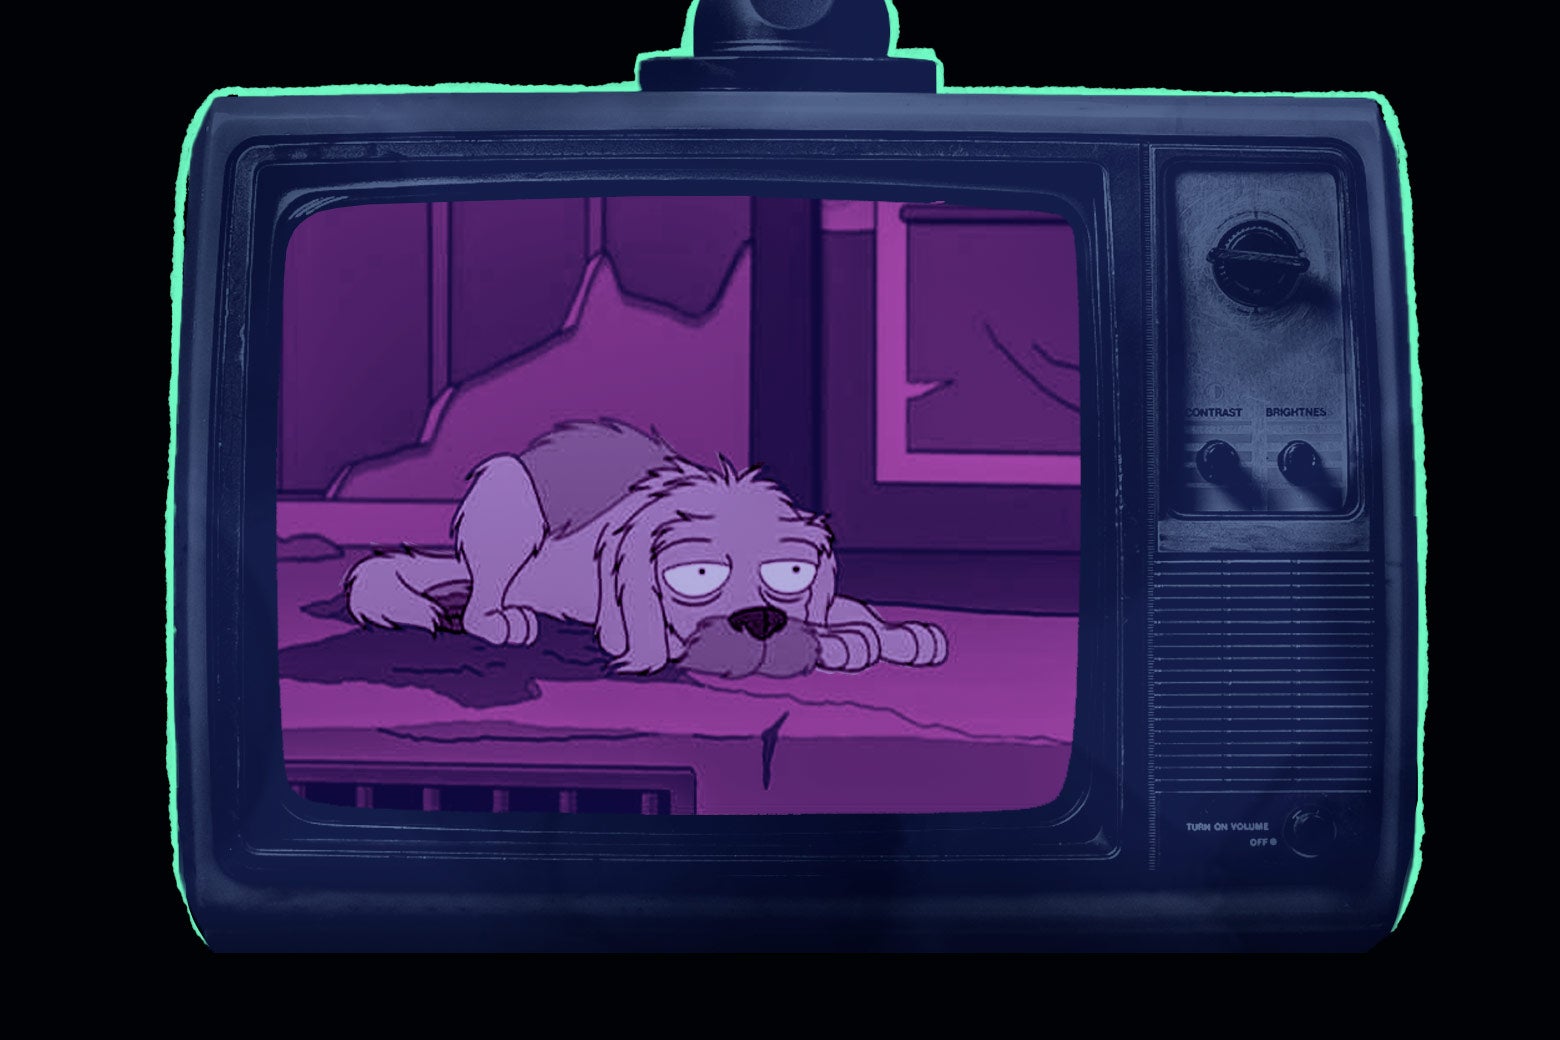 Still of an old decrepit dog from the end of the Futurama episode "Jurassic Bark" playing on a TV